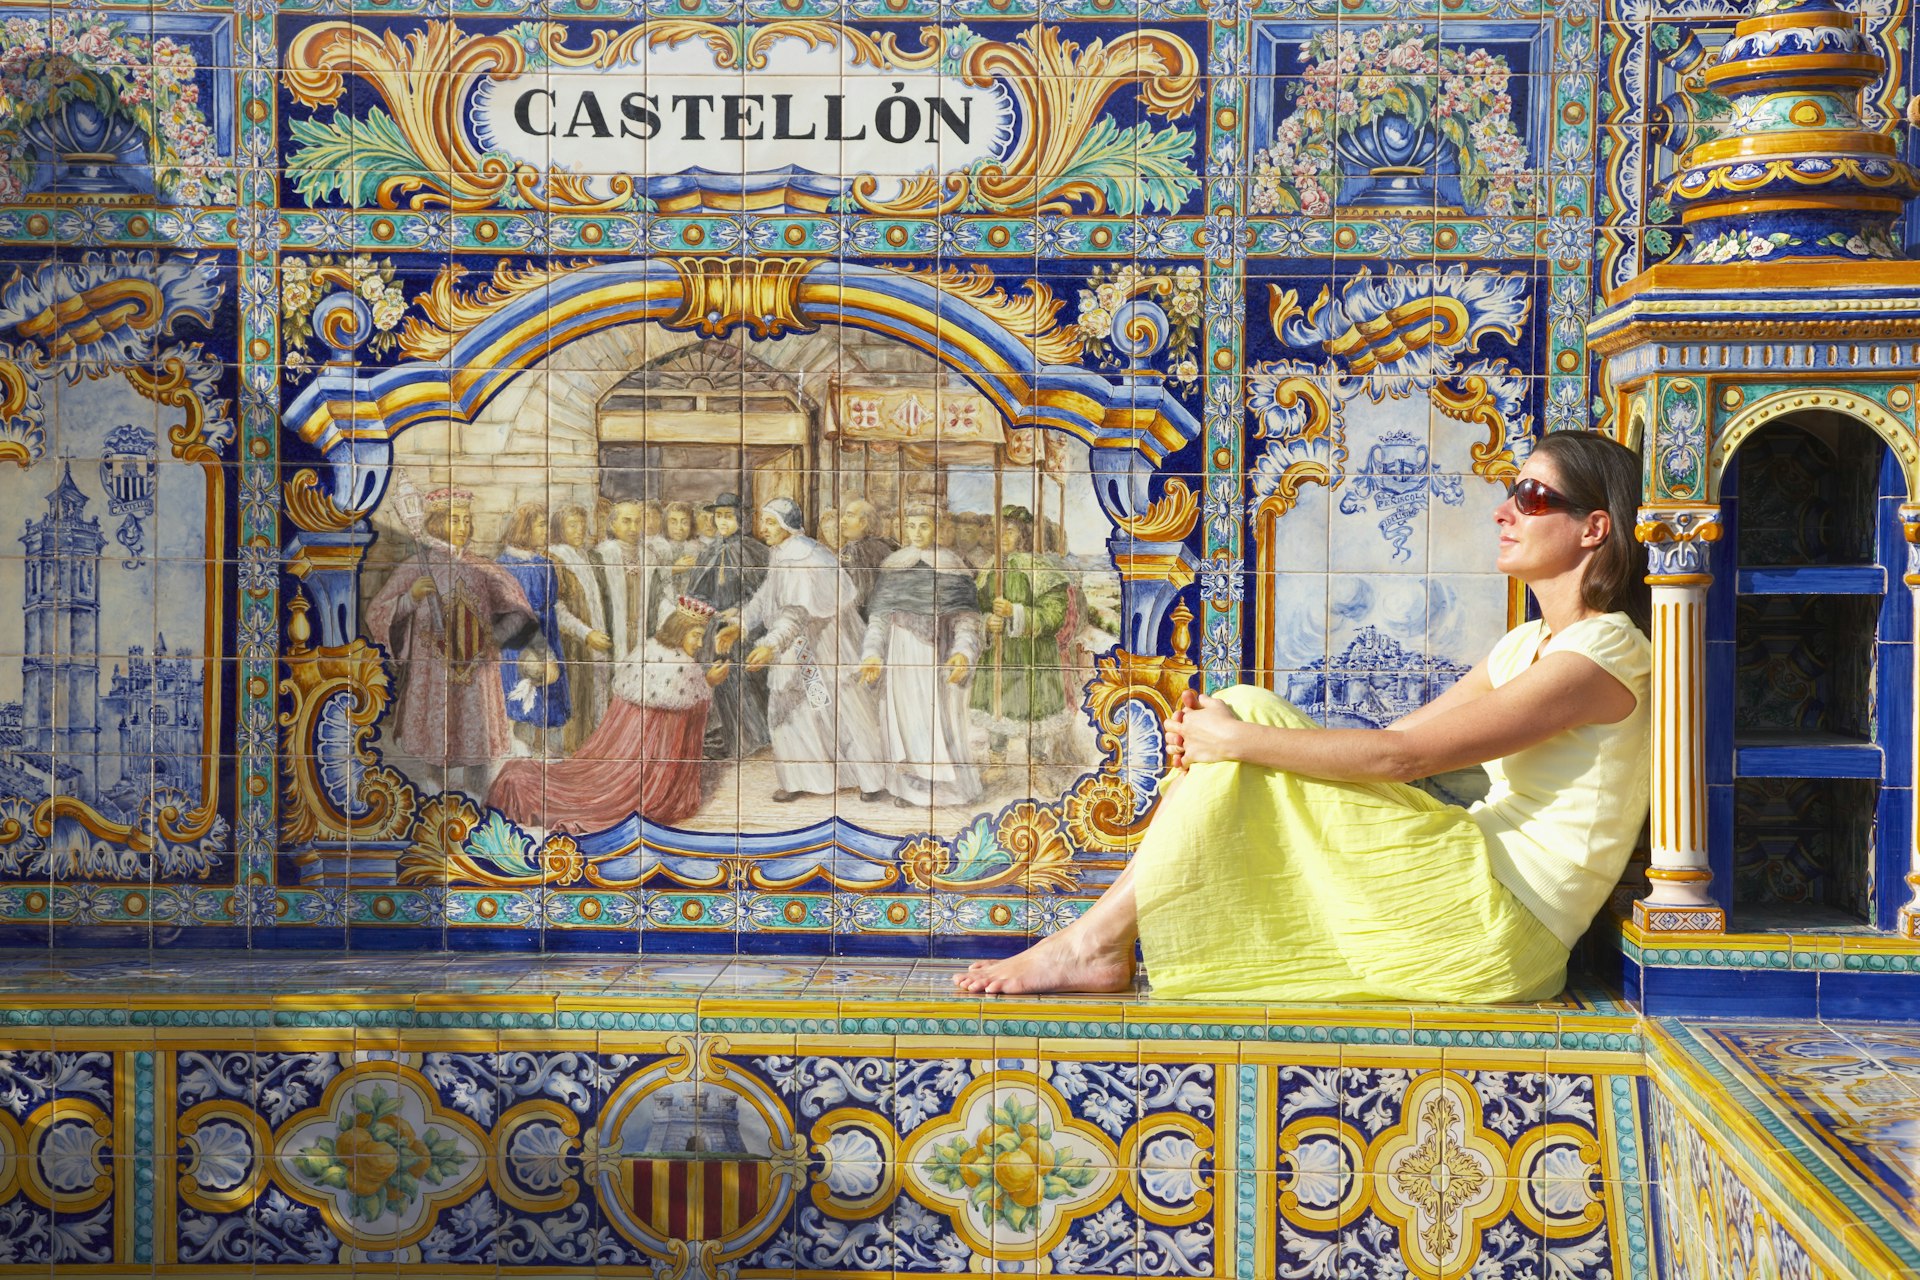 A woman sits on one of the ceramic benches at Plaza de Espana